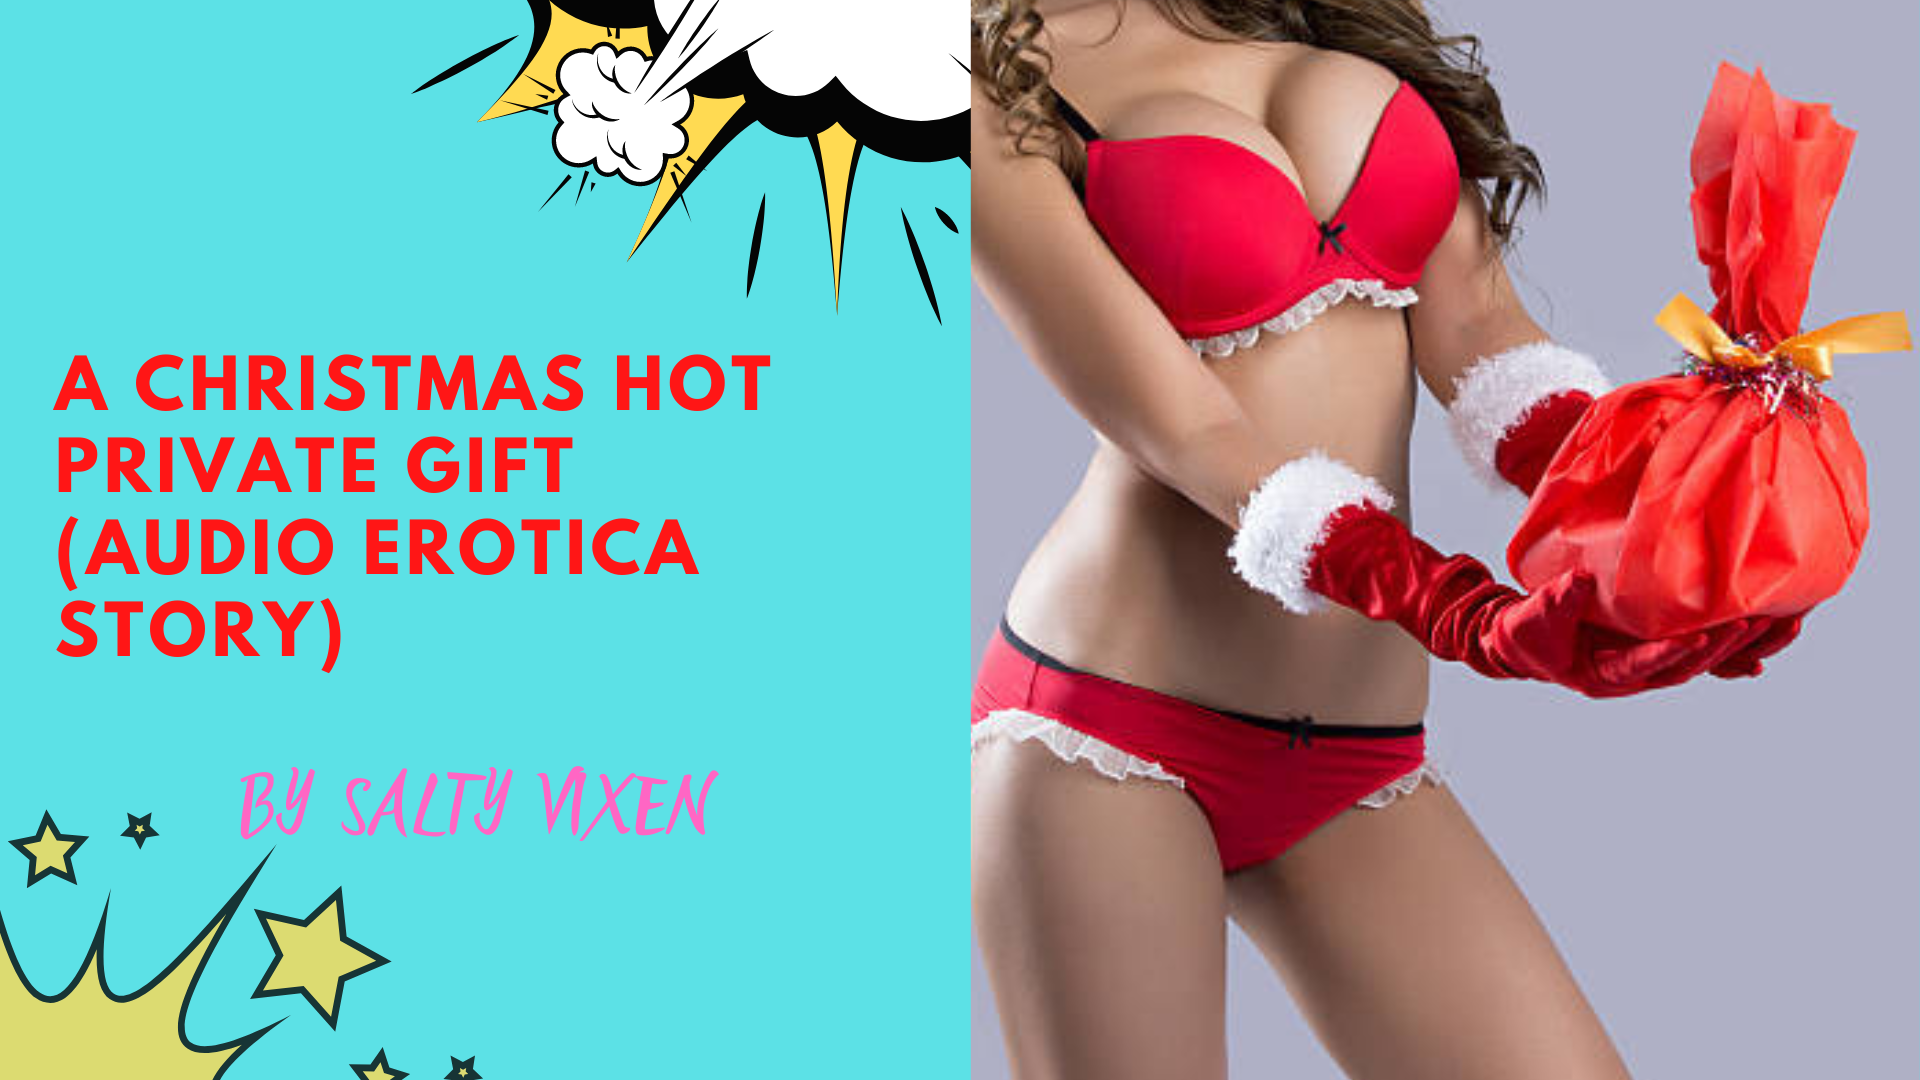 A Christmas Hot Private Gift (Audio Erotica Story)